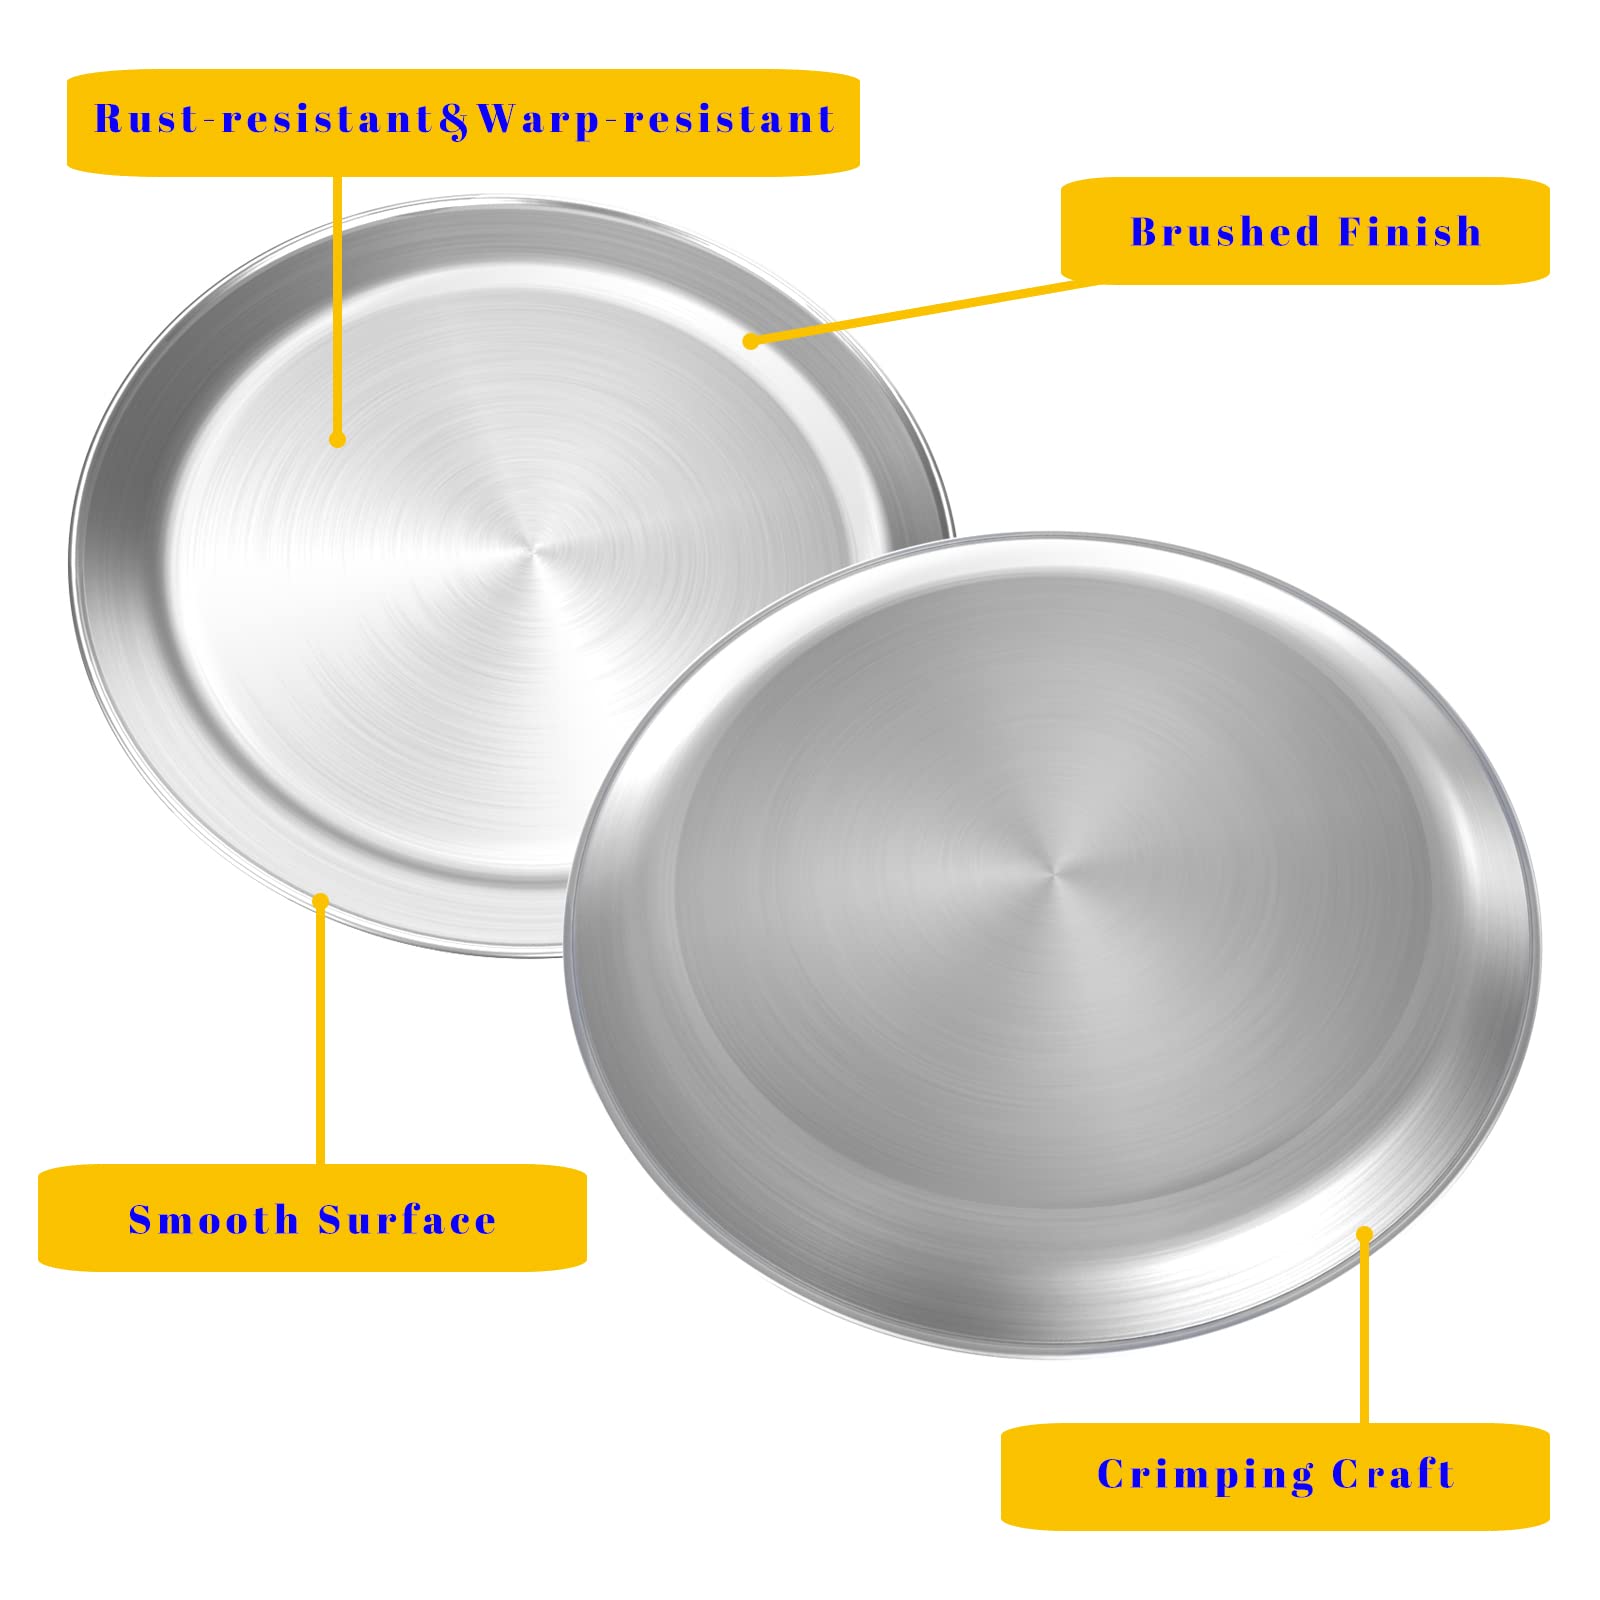 HOHUNGF Small Round Pizza Pan Set 2 Mini Stainless Steel Pizza Tray, Round Pizza Plate For Pie Cookie Pizza Cake, Non Toxic & Heavy Duty, Brushed Finish & Easy Clean & Diameter 9 Inch